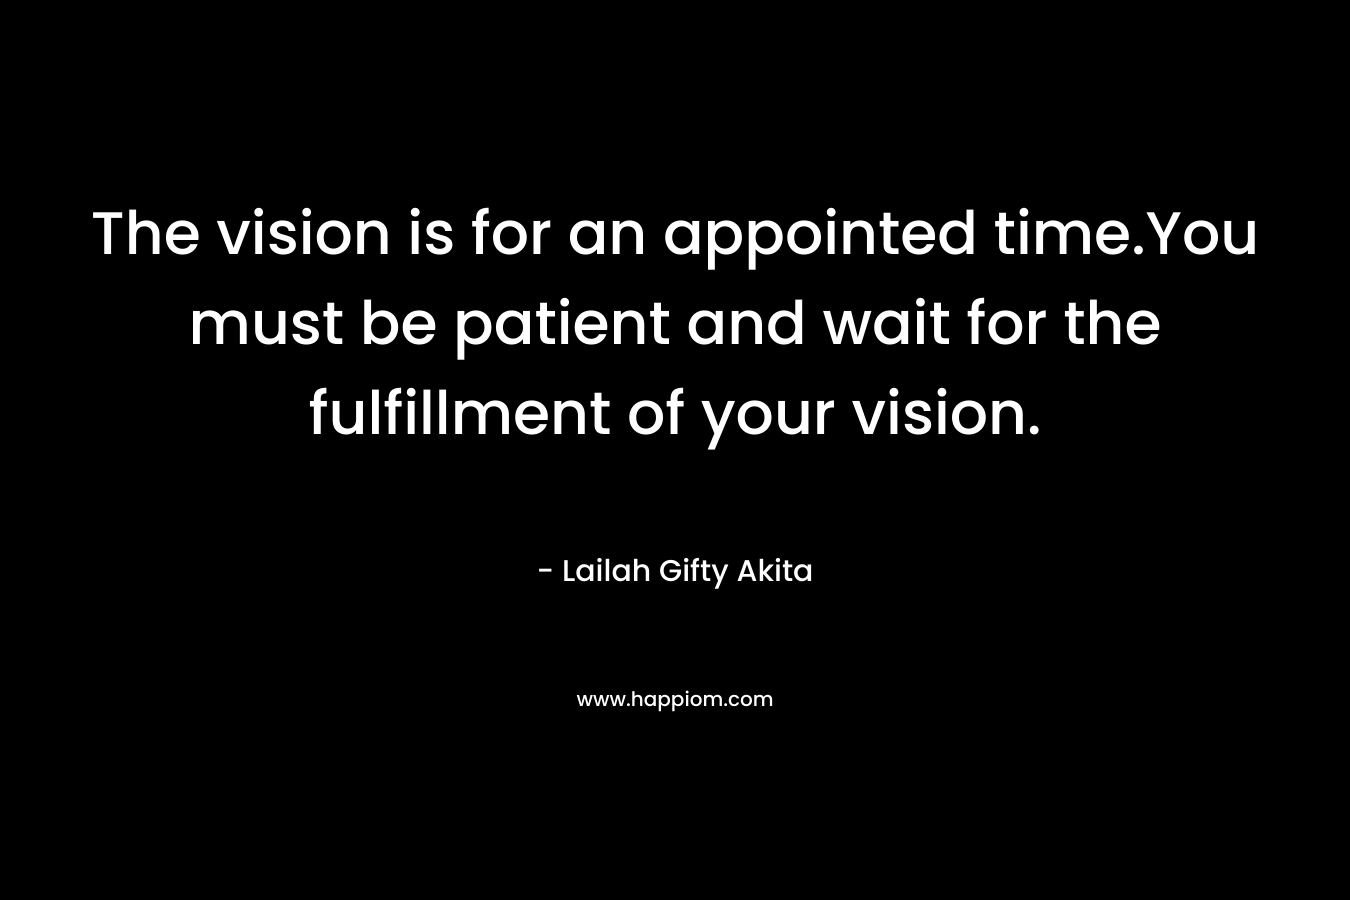 The vision is for an appointed time.You must be patient and wait for the fulfillment of your vision. – Lailah Gifty Akita